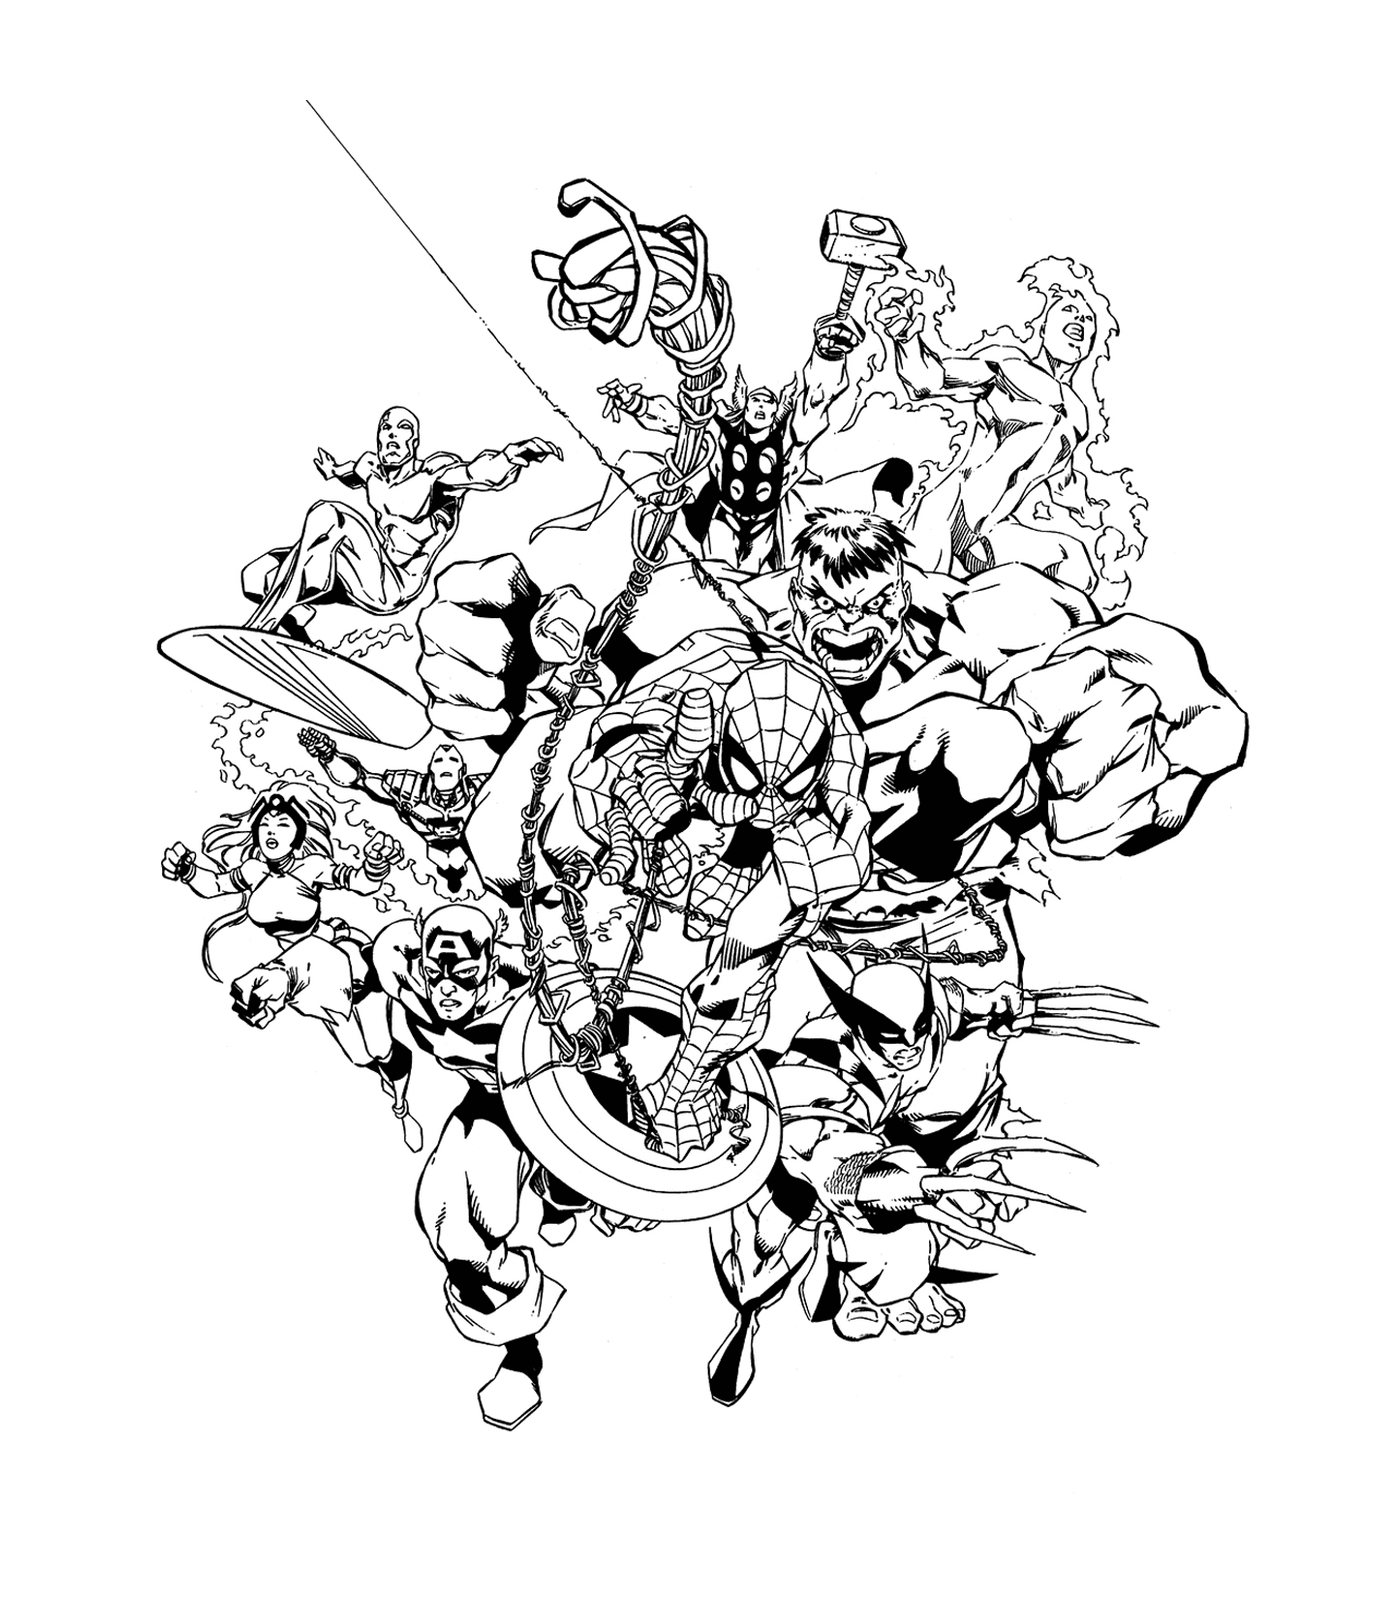  A group of superheroes gathered in this black and white drawing 